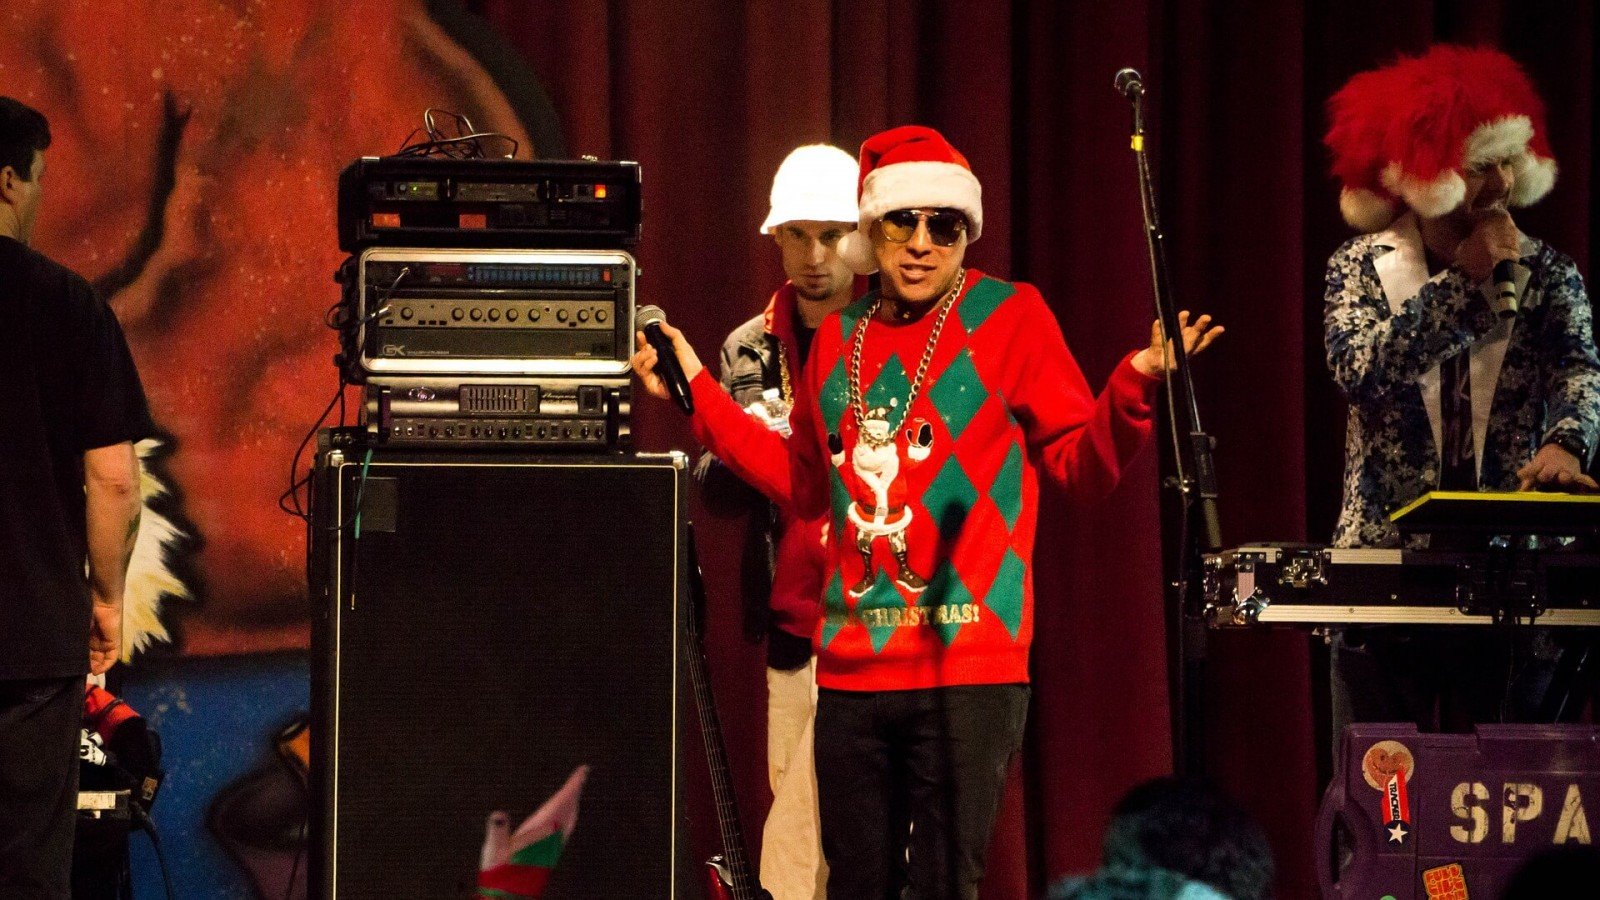 Man wearing Christmas sweater at live performance